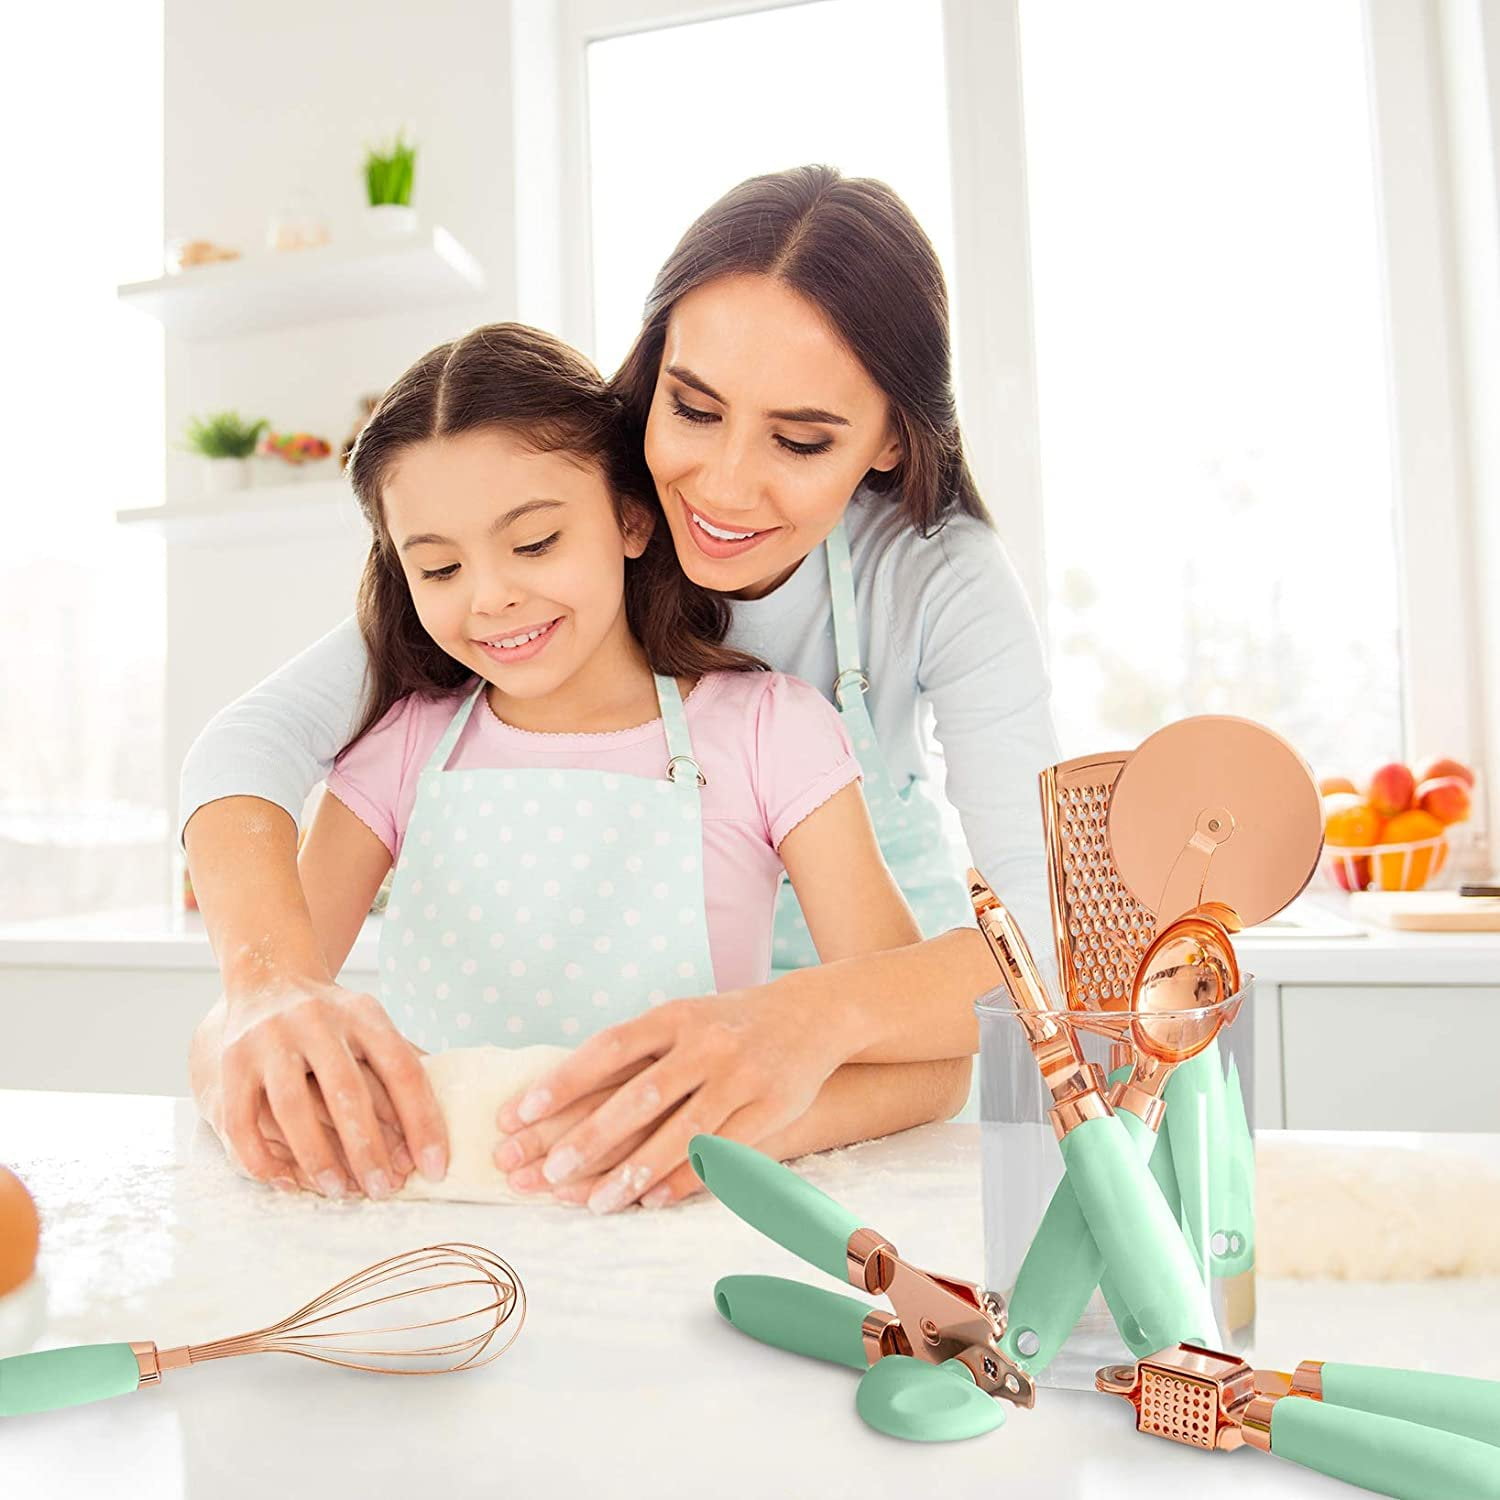 Kitchen gadget gifts for the family cook - Cool Mom Picks